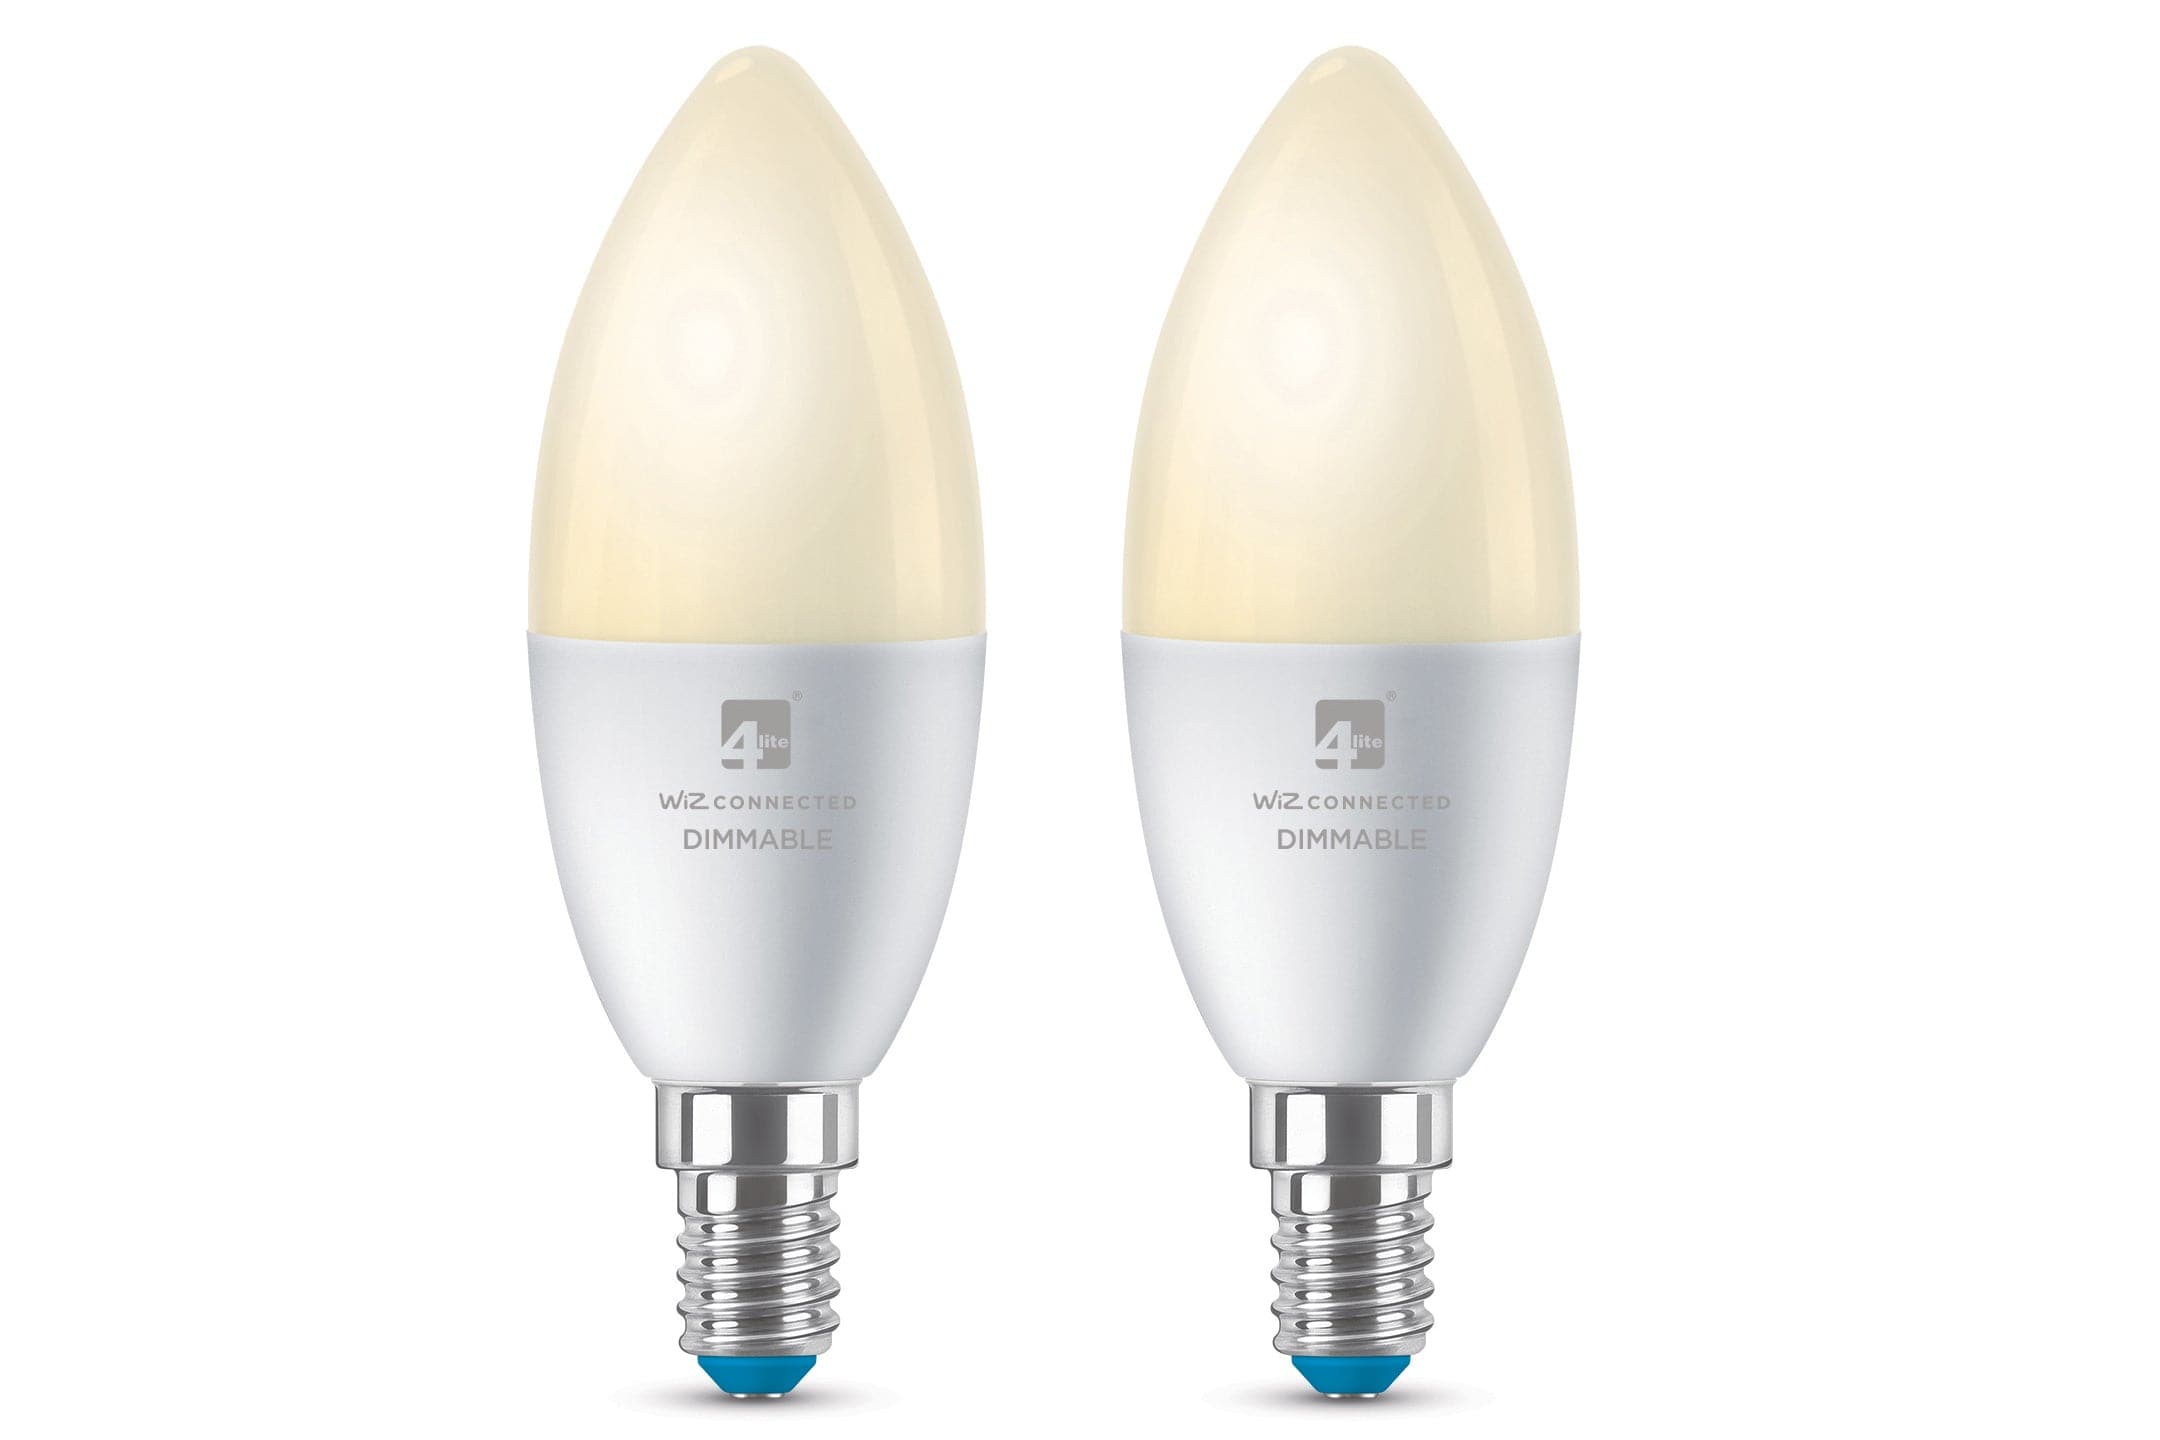 4lite WiZ Connected C37 Candle Dimmable Warm White WiFi LED Smart Bulb - E14 Small Screw (Pack of 2)